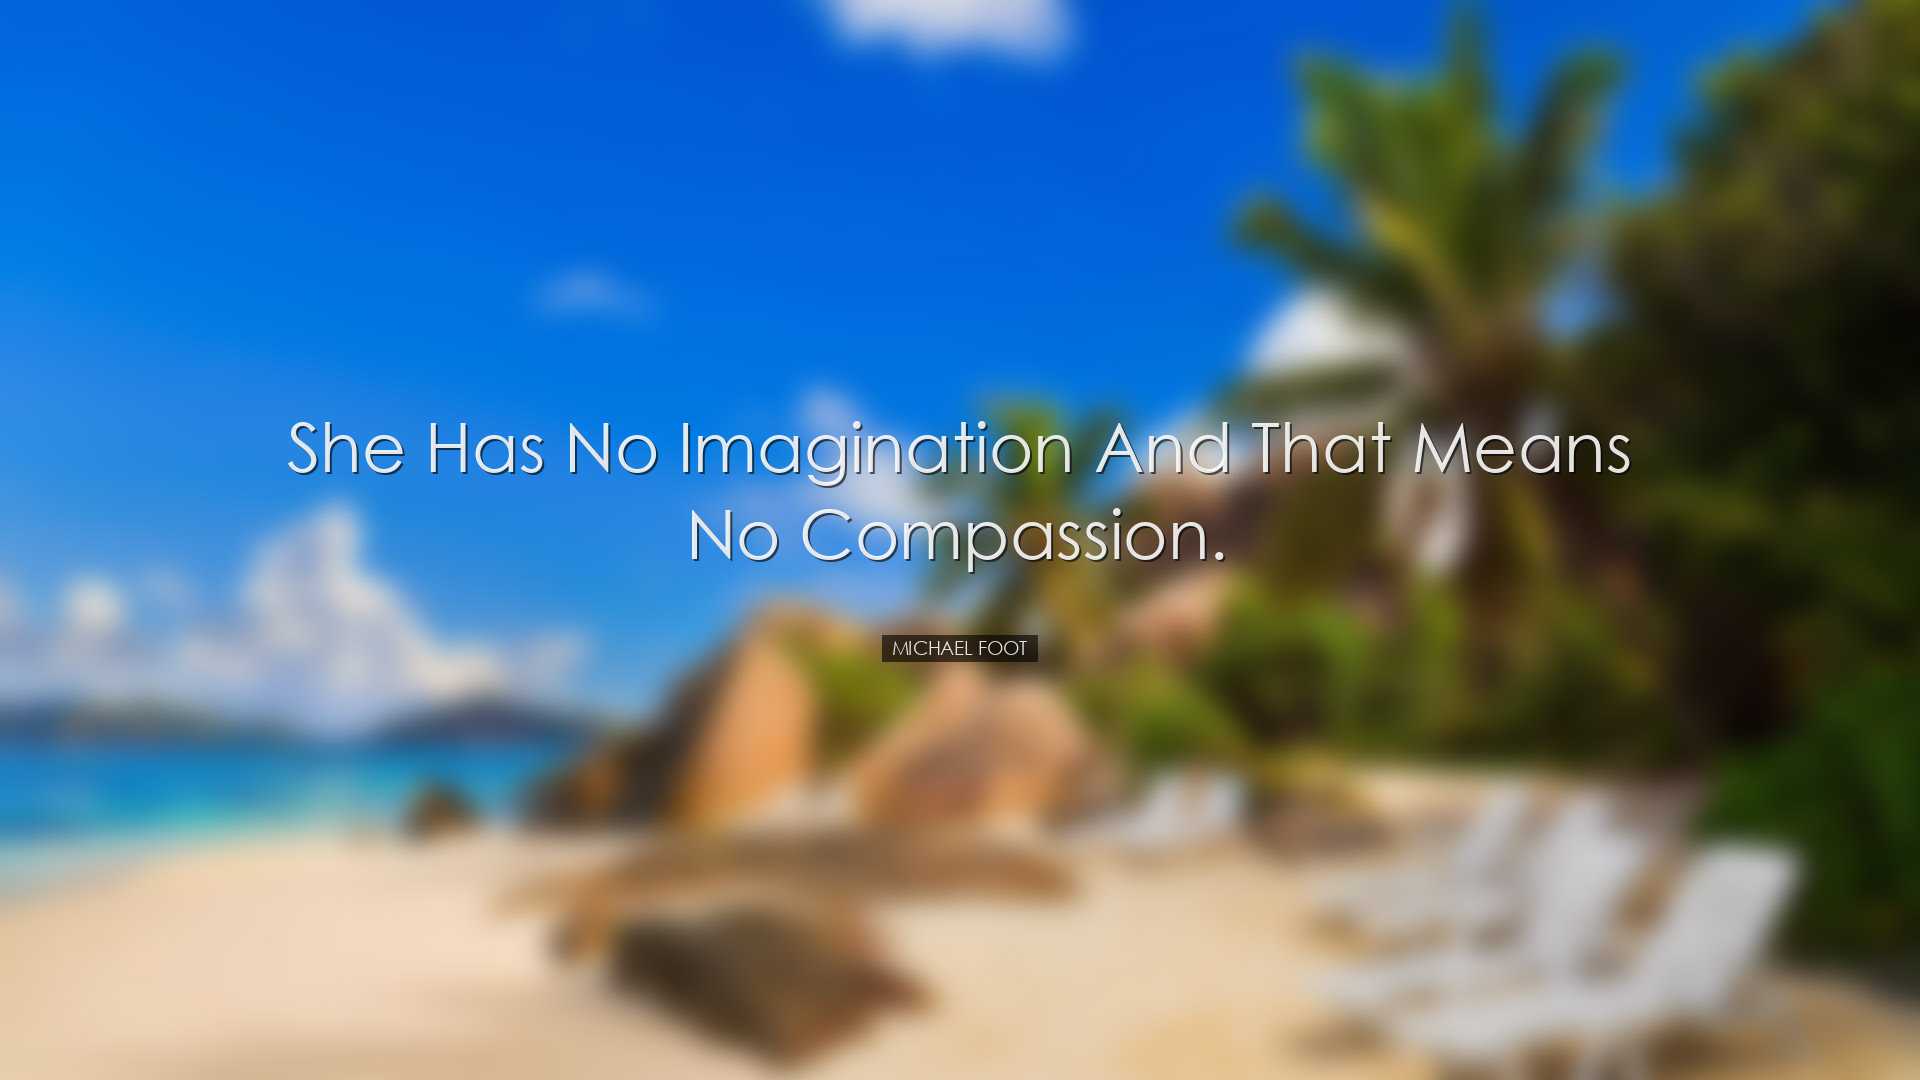 She has no imagination and that means no compassion. - Michael Foo